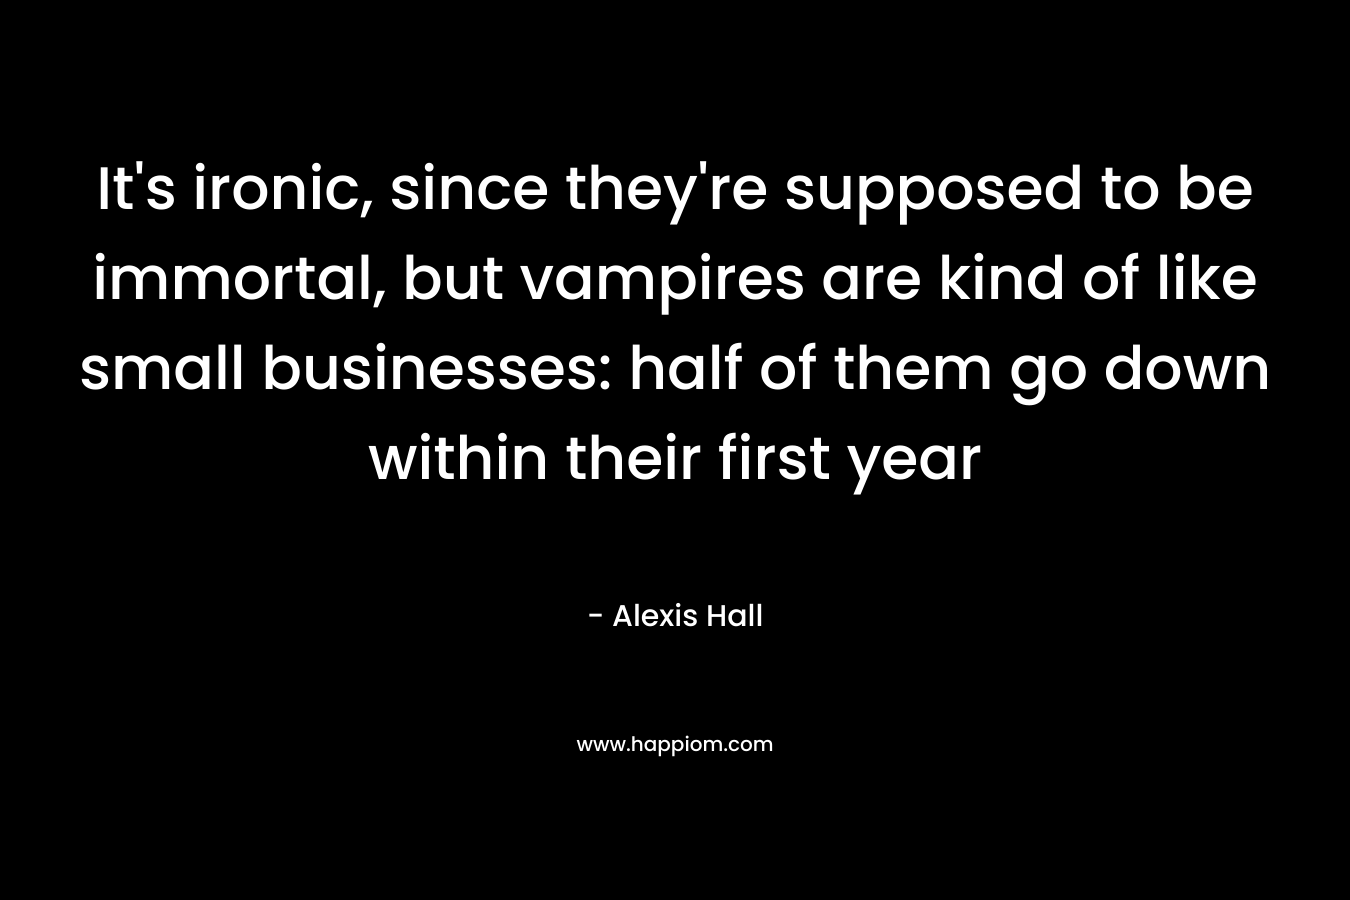 It's ironic, since they're supposed to be immortal, but vampires are kind of like small businesses: half of them go down within their first year